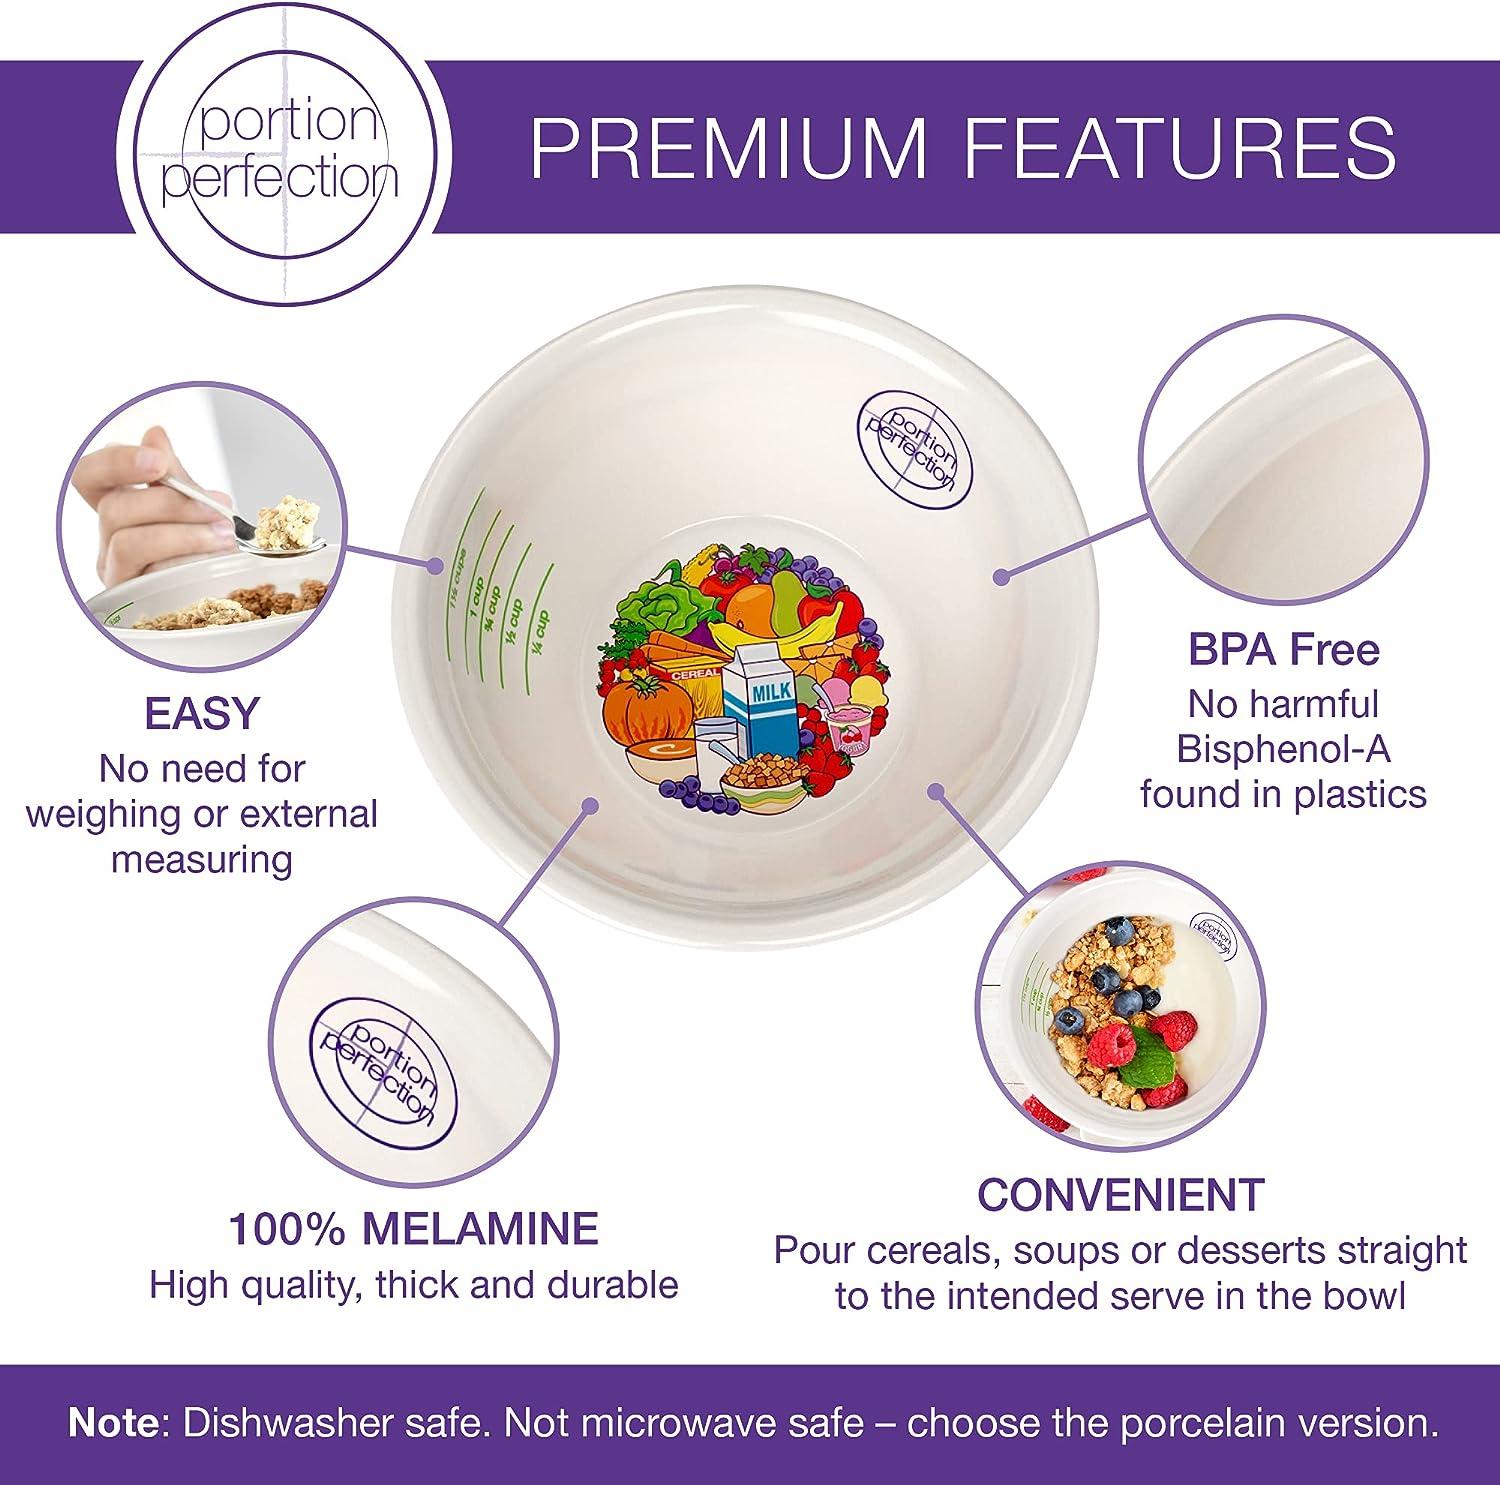 NEW product for our bariatric - Portion Perfection